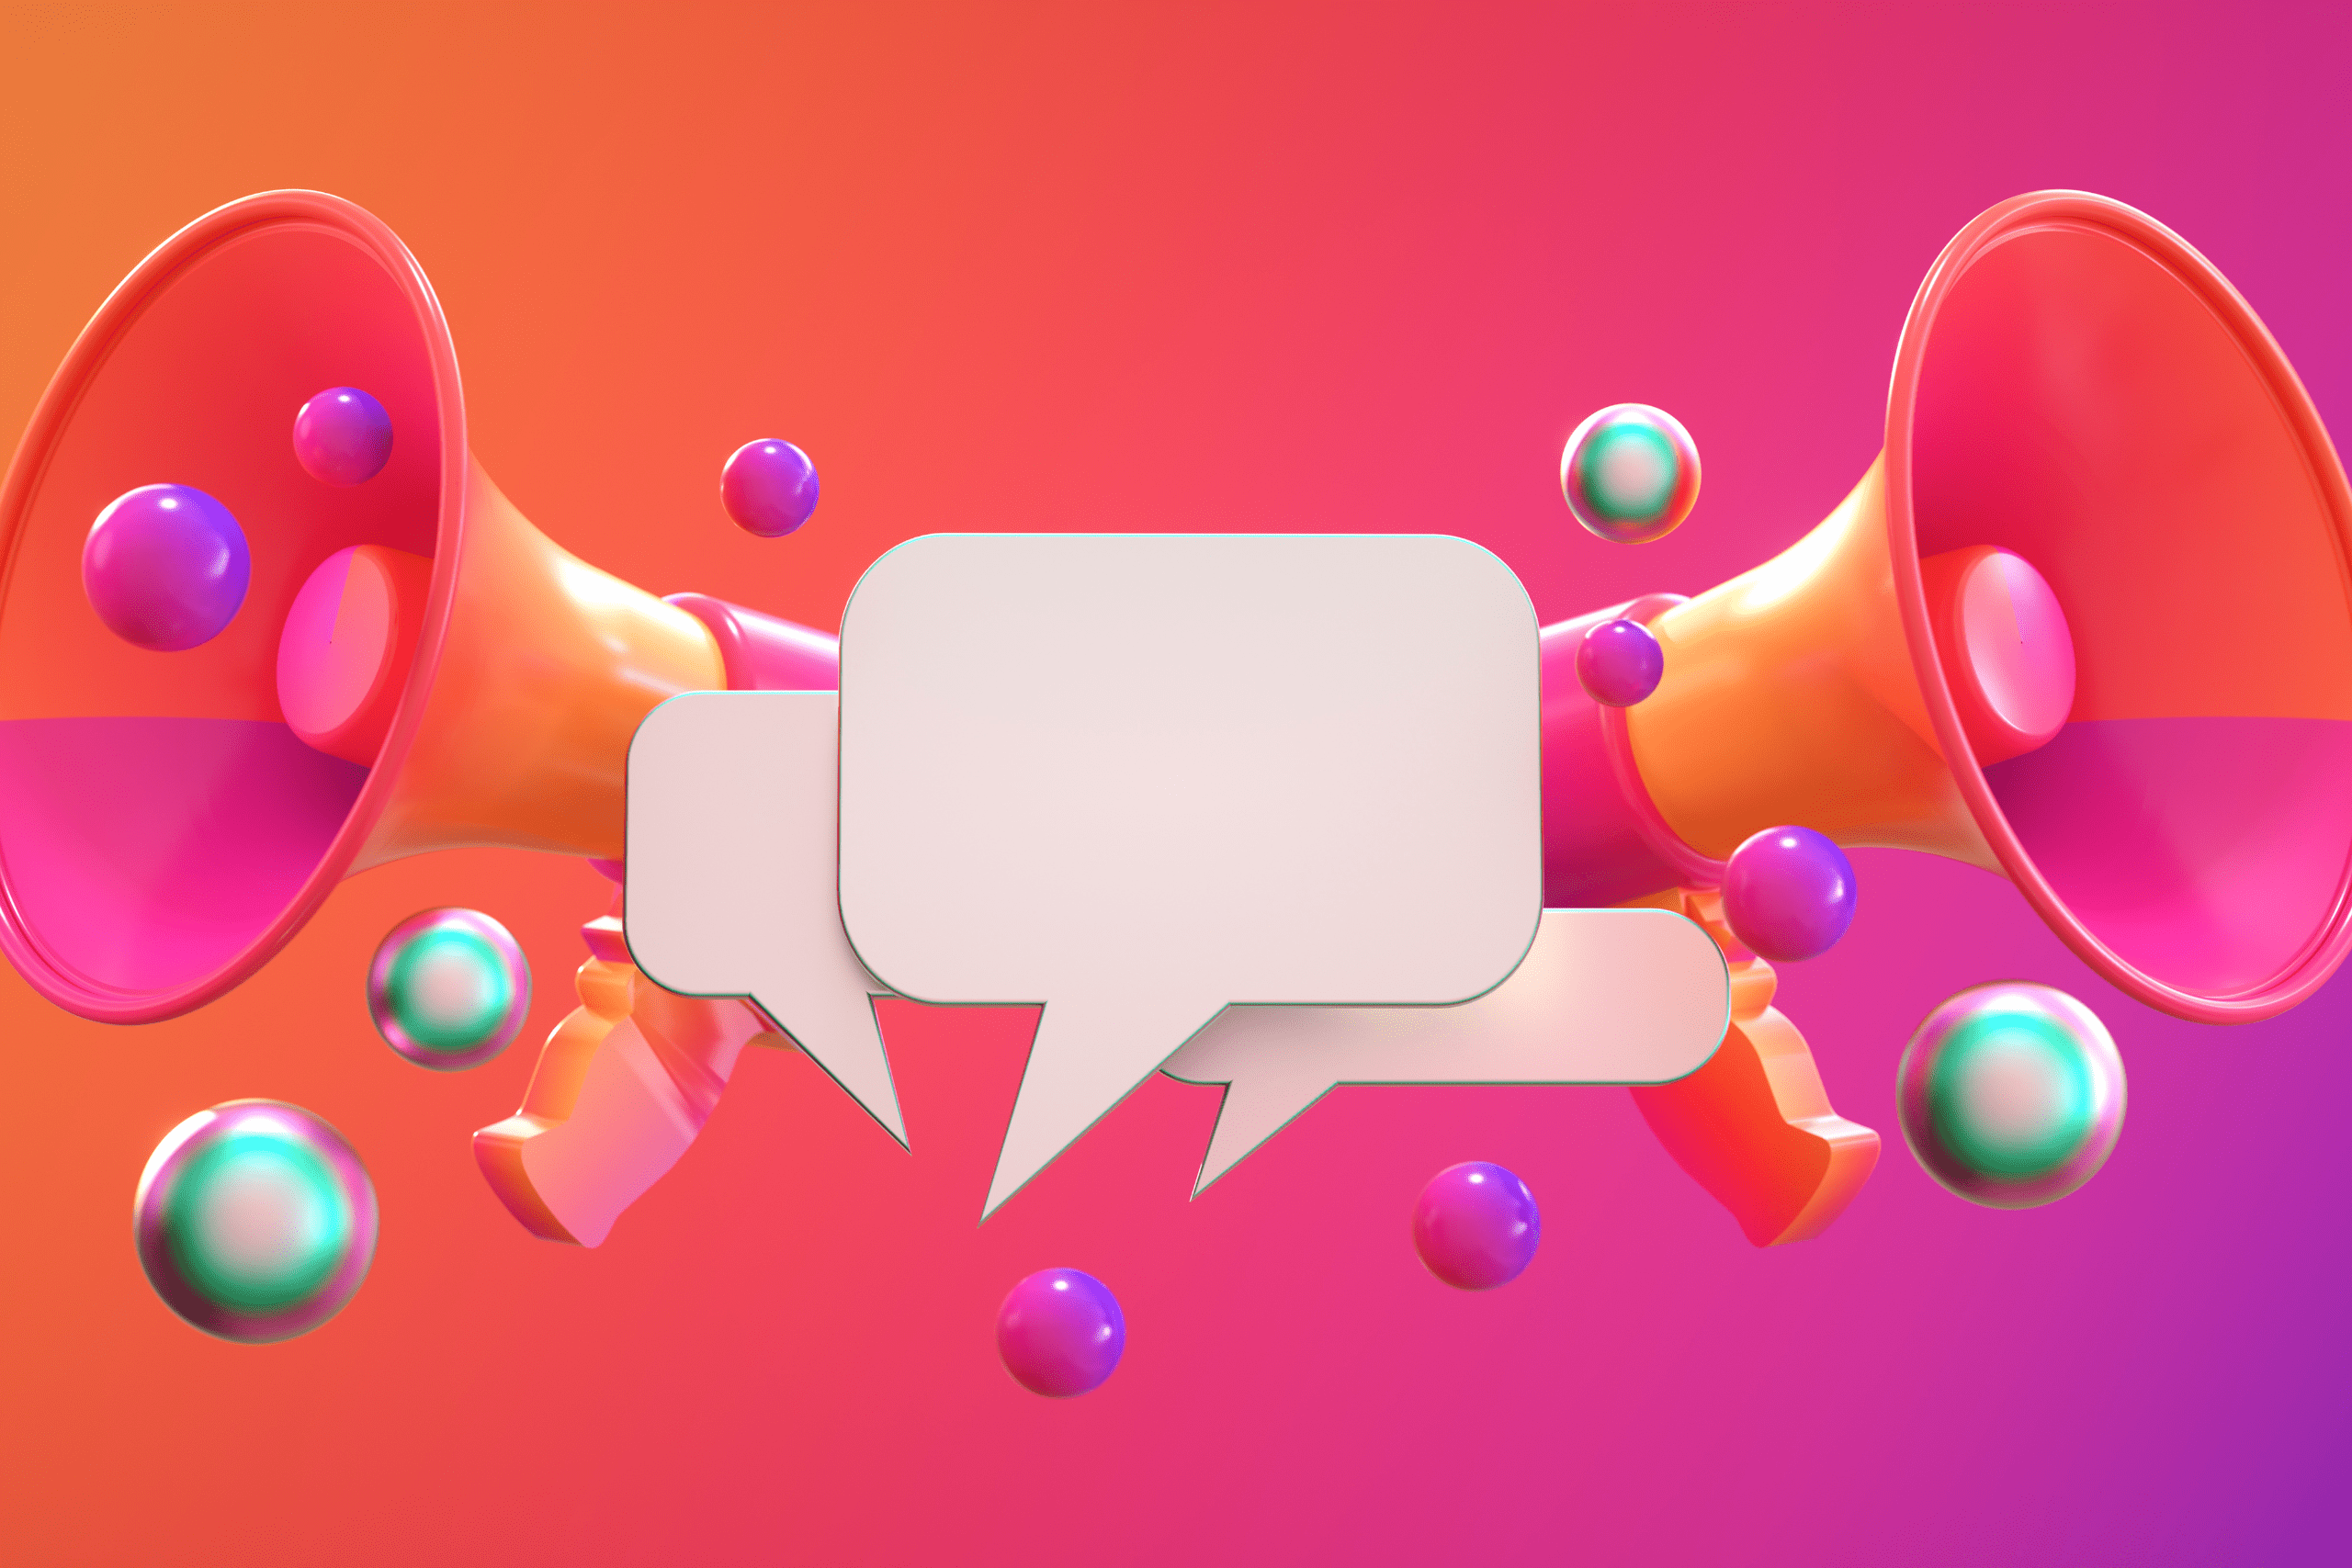 Image of speak bubbles and megaphones to depict how our Full Service Agency can help you make some noise within your industry.